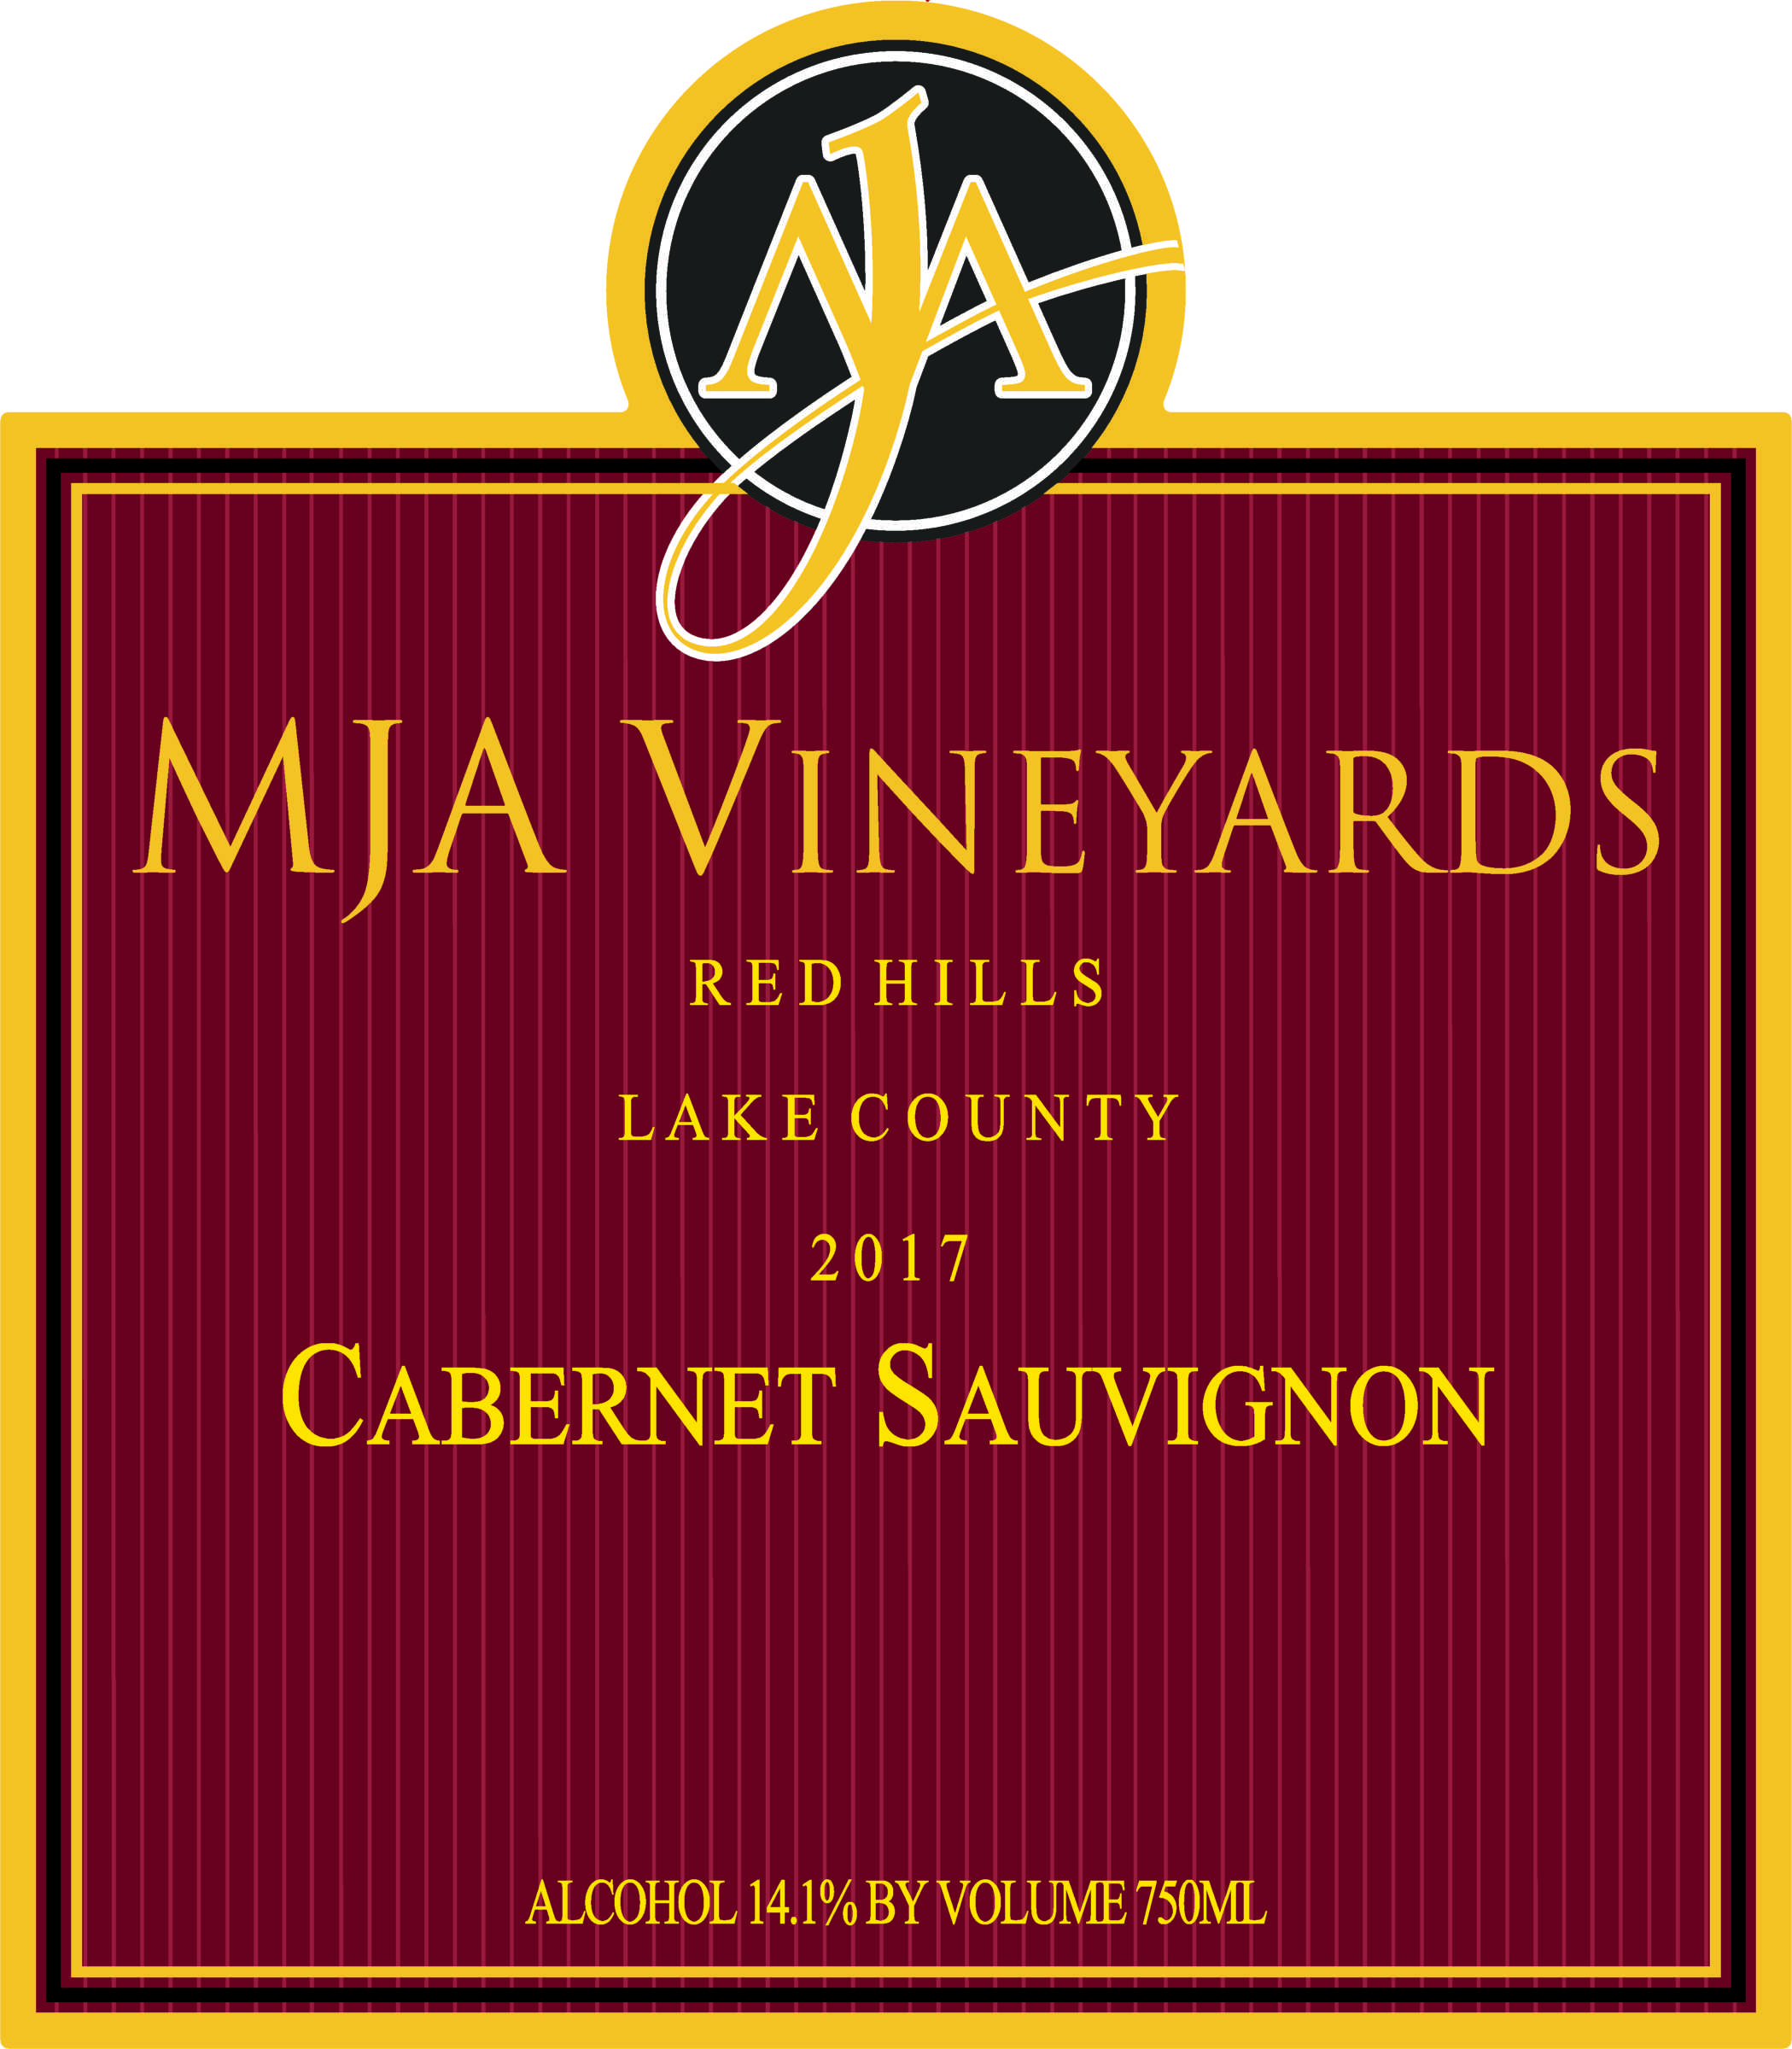 Product Image for 2017 Red Hills Lake County Cabernet Sauvignon "Big Red" (Formerly "Bandito")